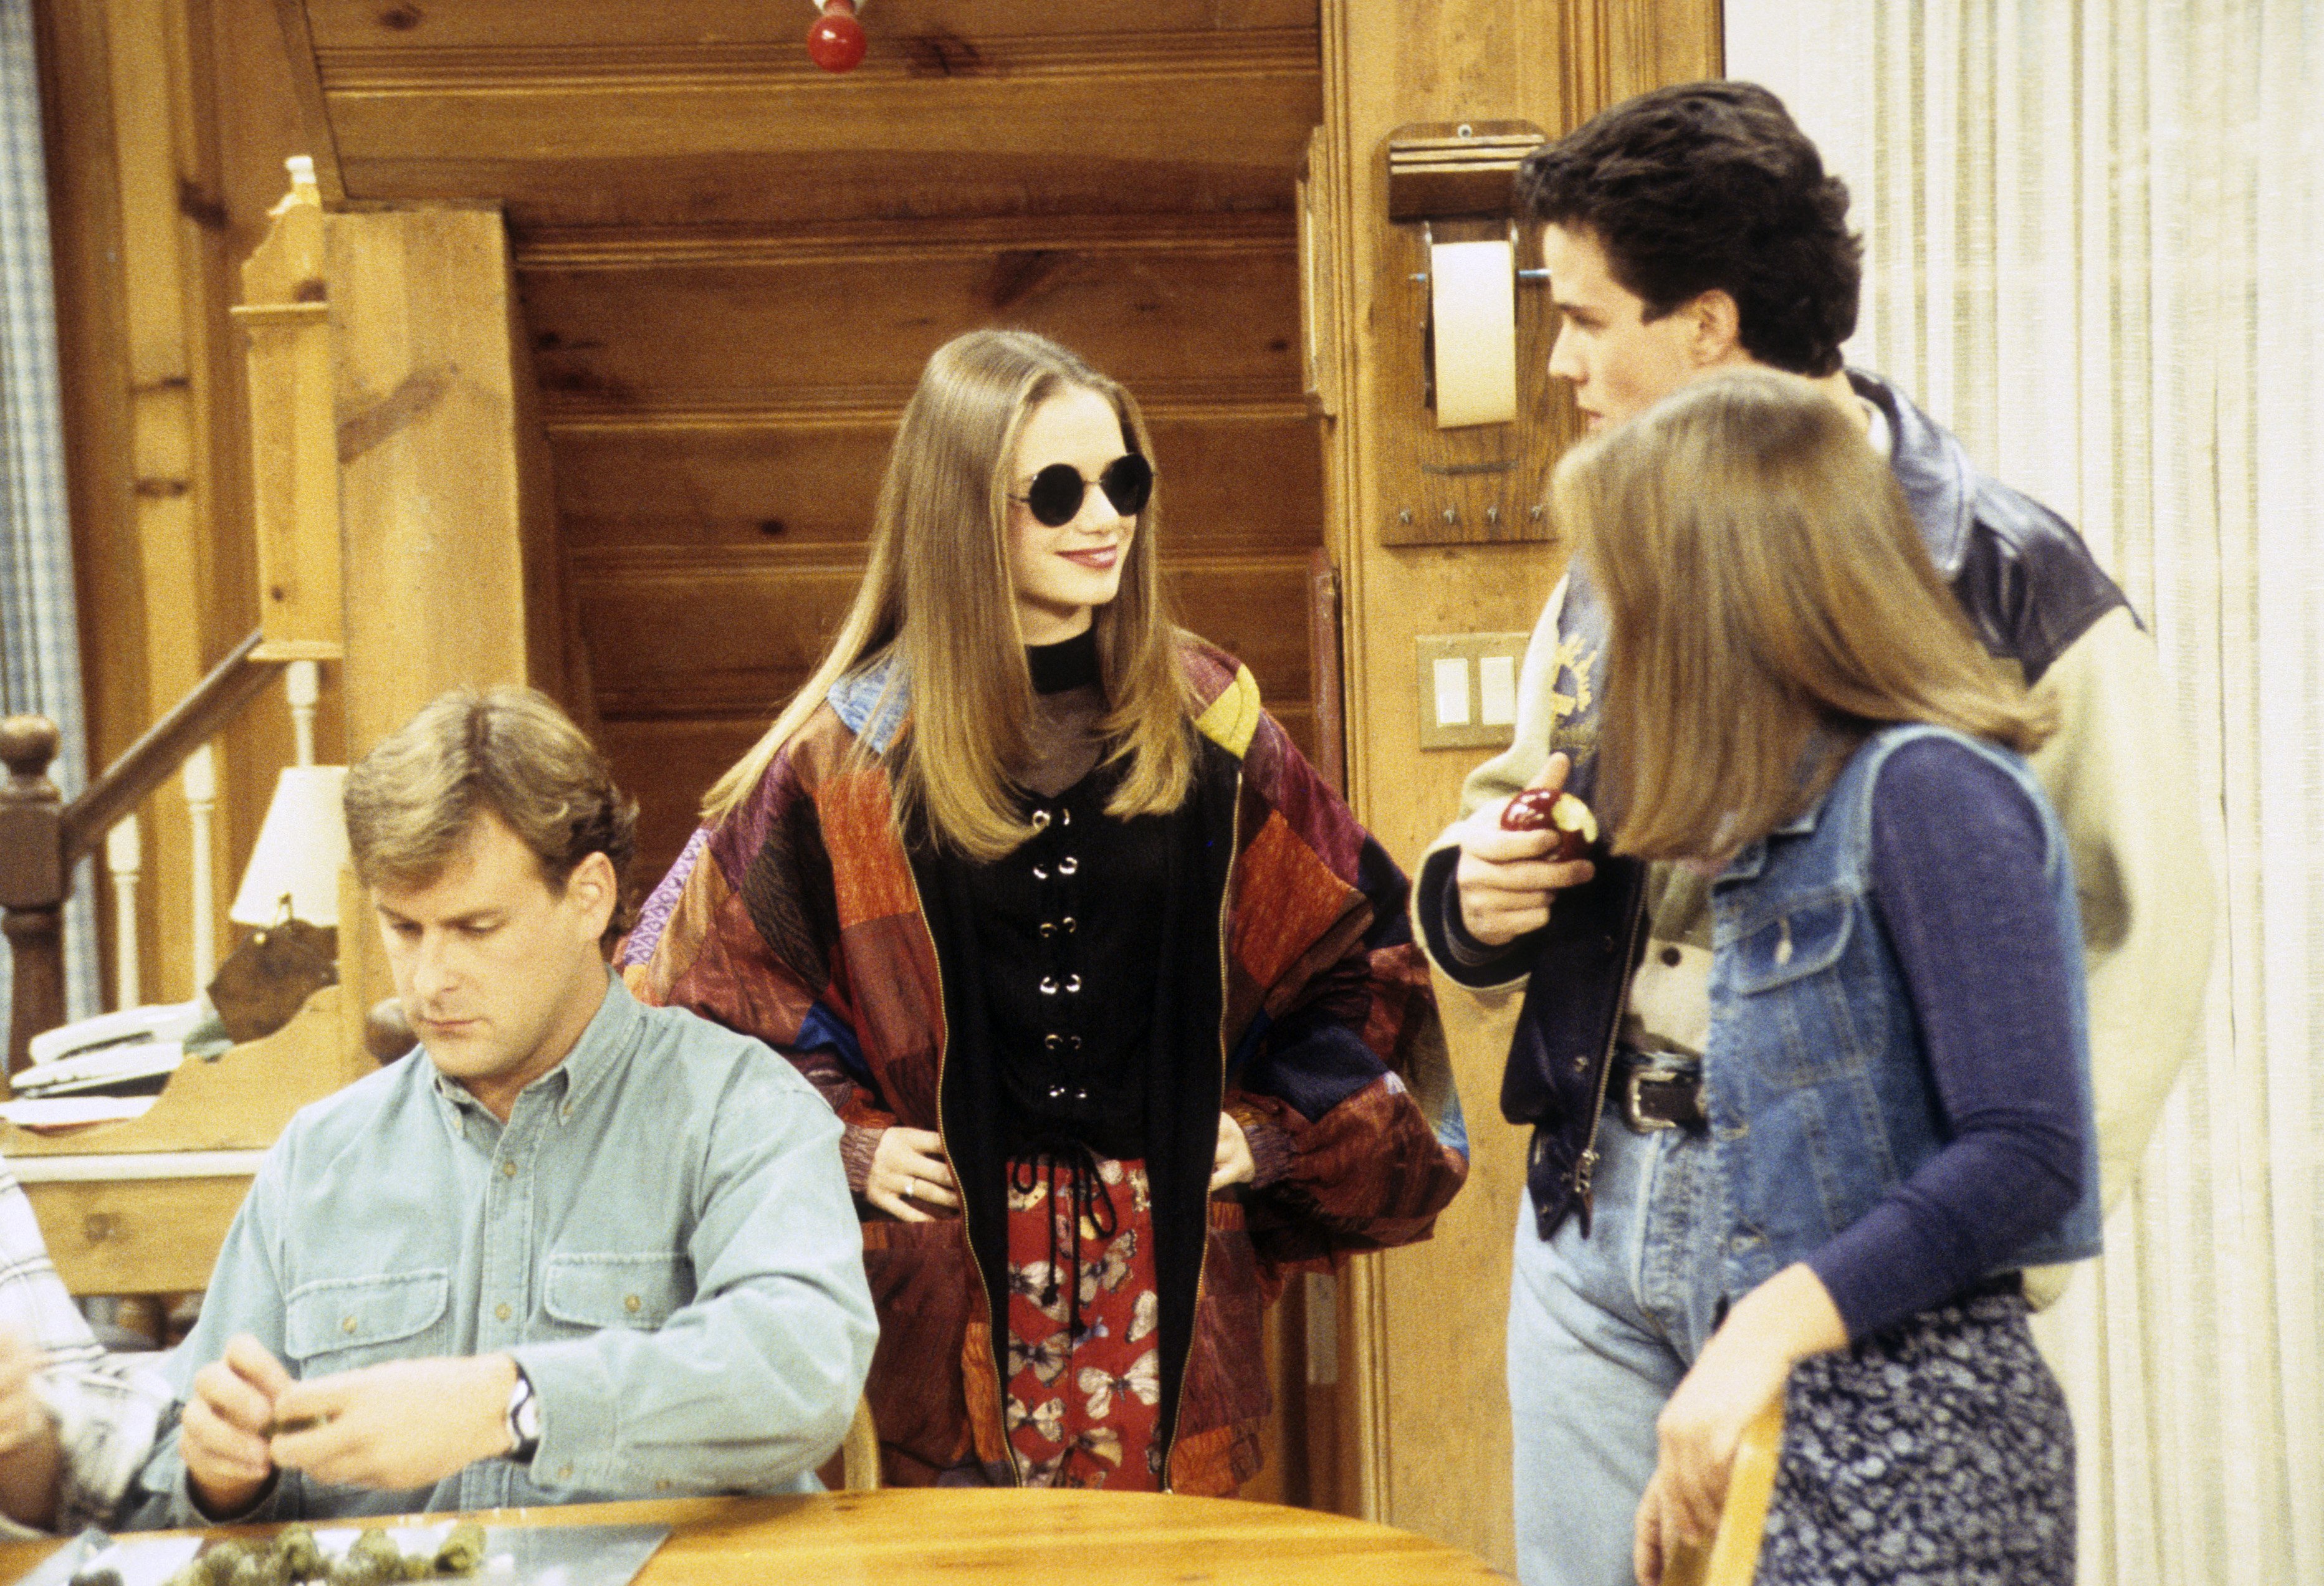 ‘Full House’: Did Kimmy Gibbler Have a Brother?